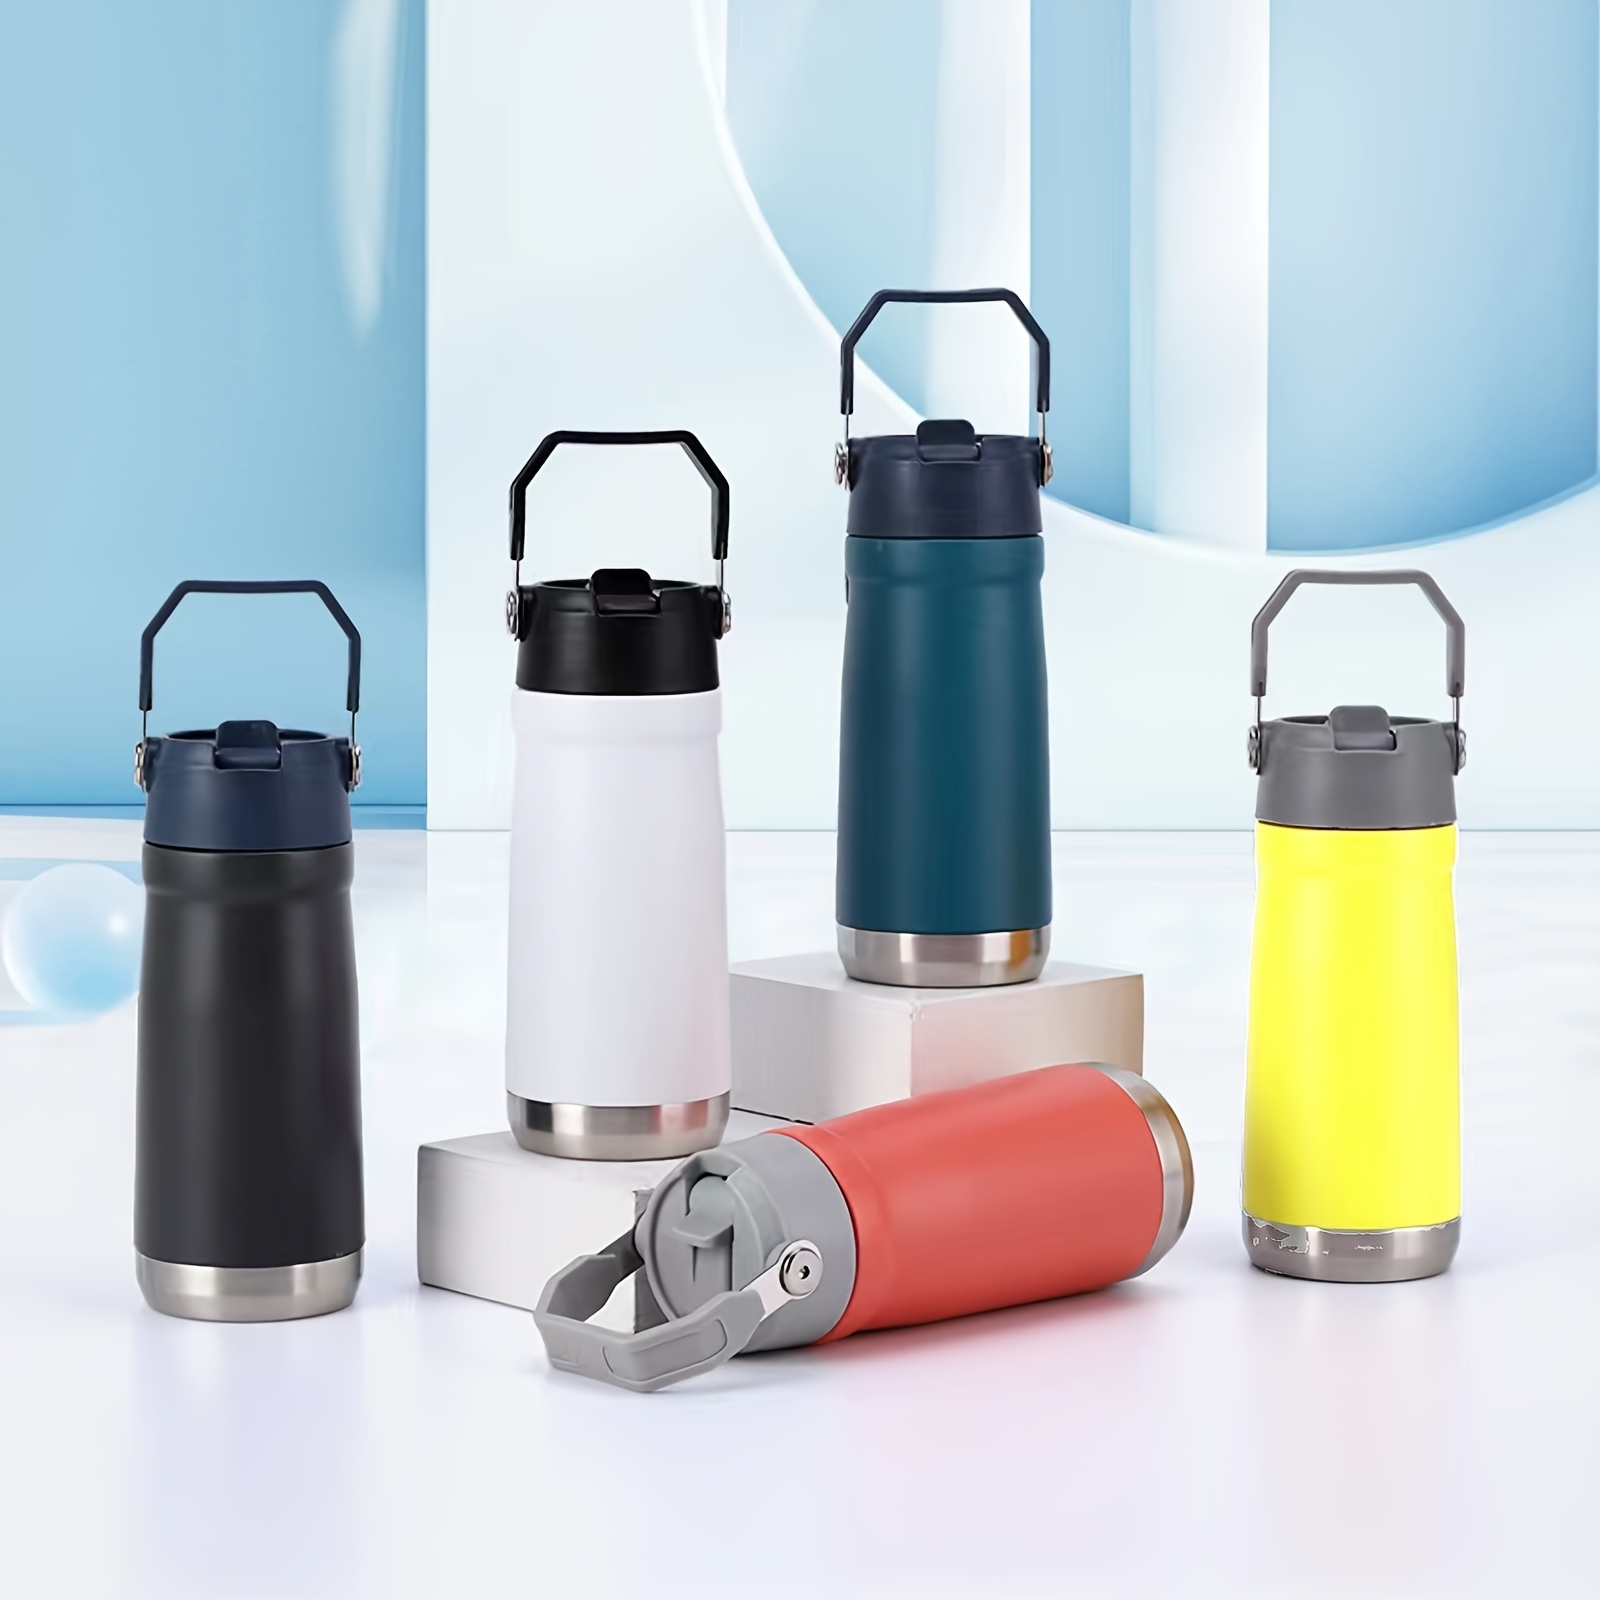 RTIC Cub Kids Insulated Water Bottle, Double Wall Vacuum Stainless Steel  Drink Bottles, For Hot Cold Drinks With Flip Lid And Straw For School Or